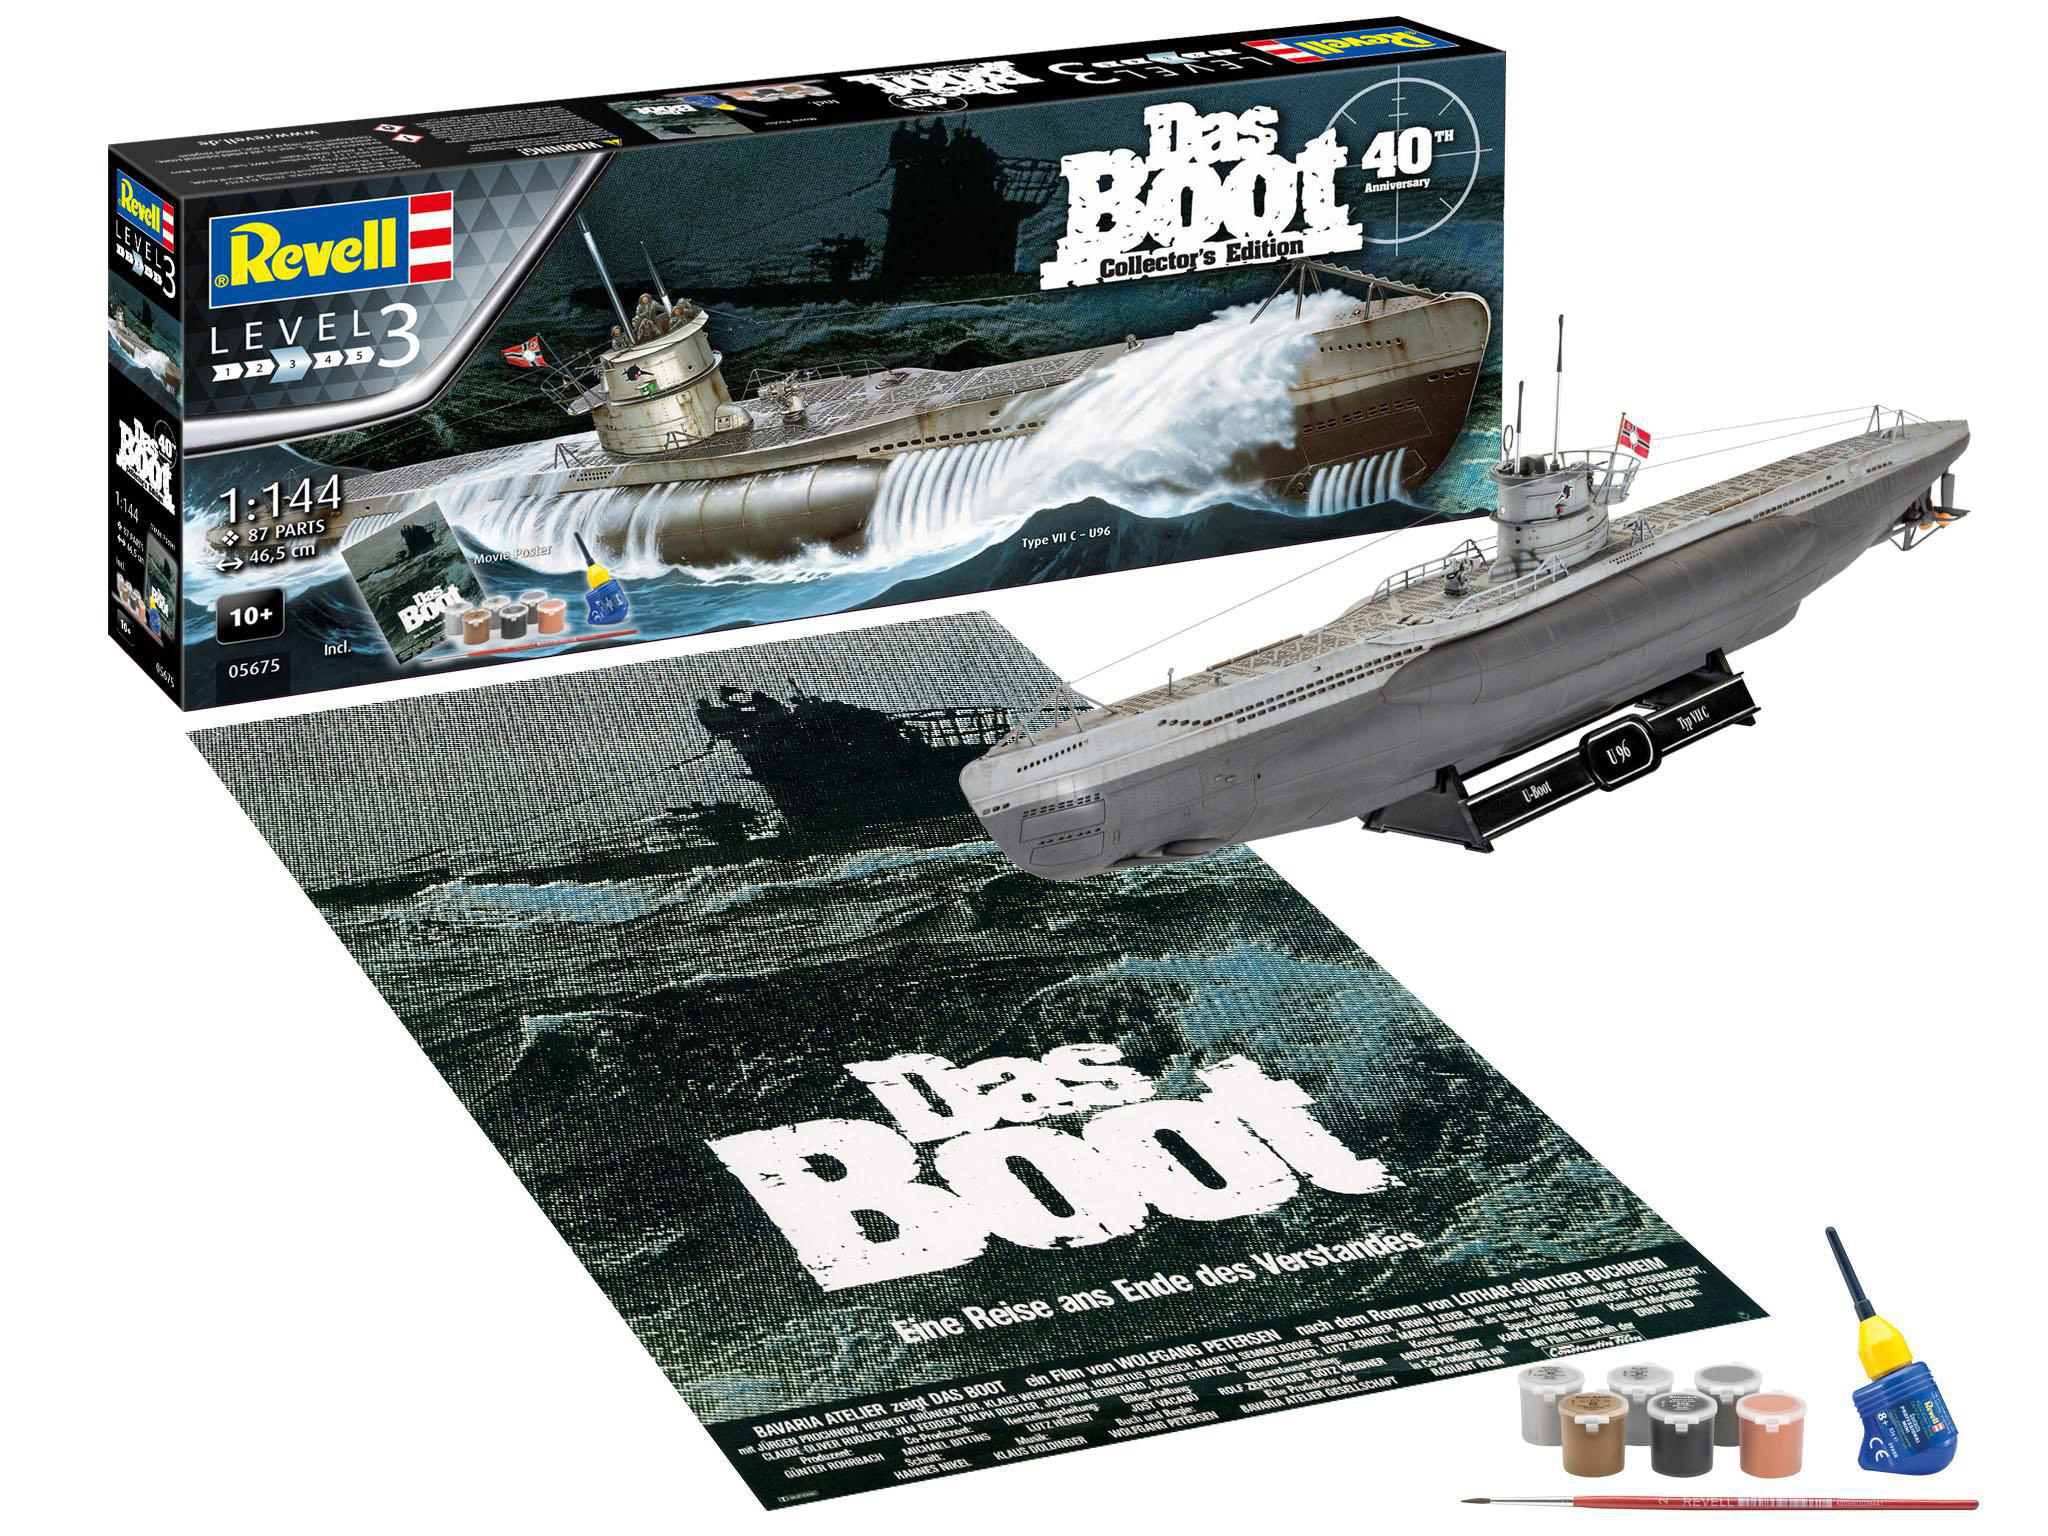 40th Edition Modellbausatz, Das Mehrfarbig REVELL Boot - Anniversary Collector\'s